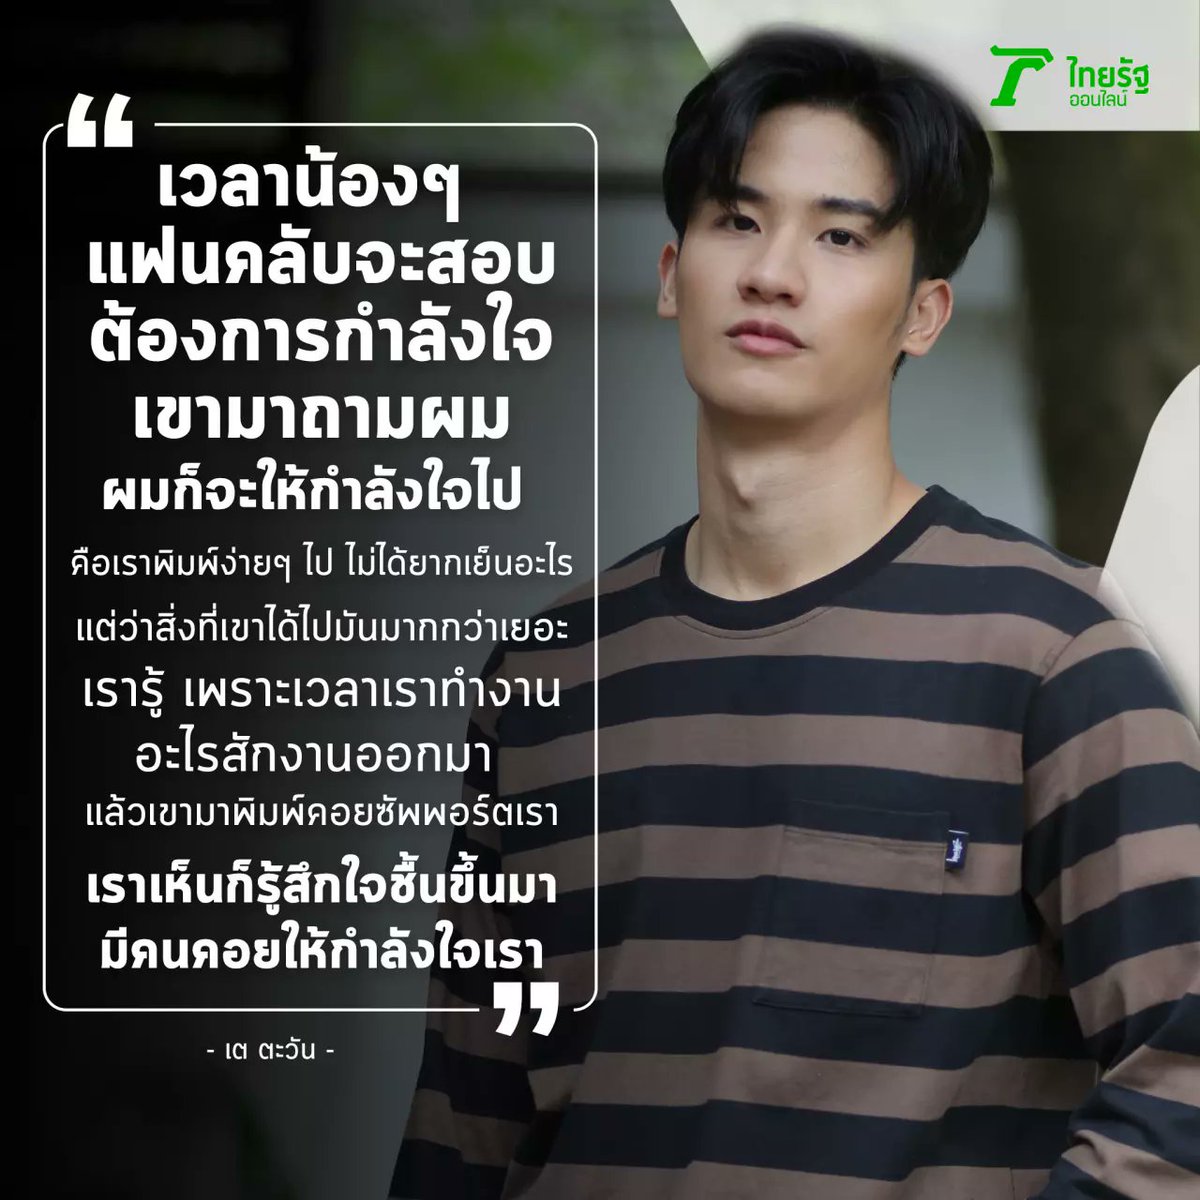  #Tawan_V "When fans ask me for encouragements for exams, I would give them my support. It's not difficult to type it & it's worth more than just words to them. I know that well. When I see their typed encouragements as I work, I feel really cherished/glad too."